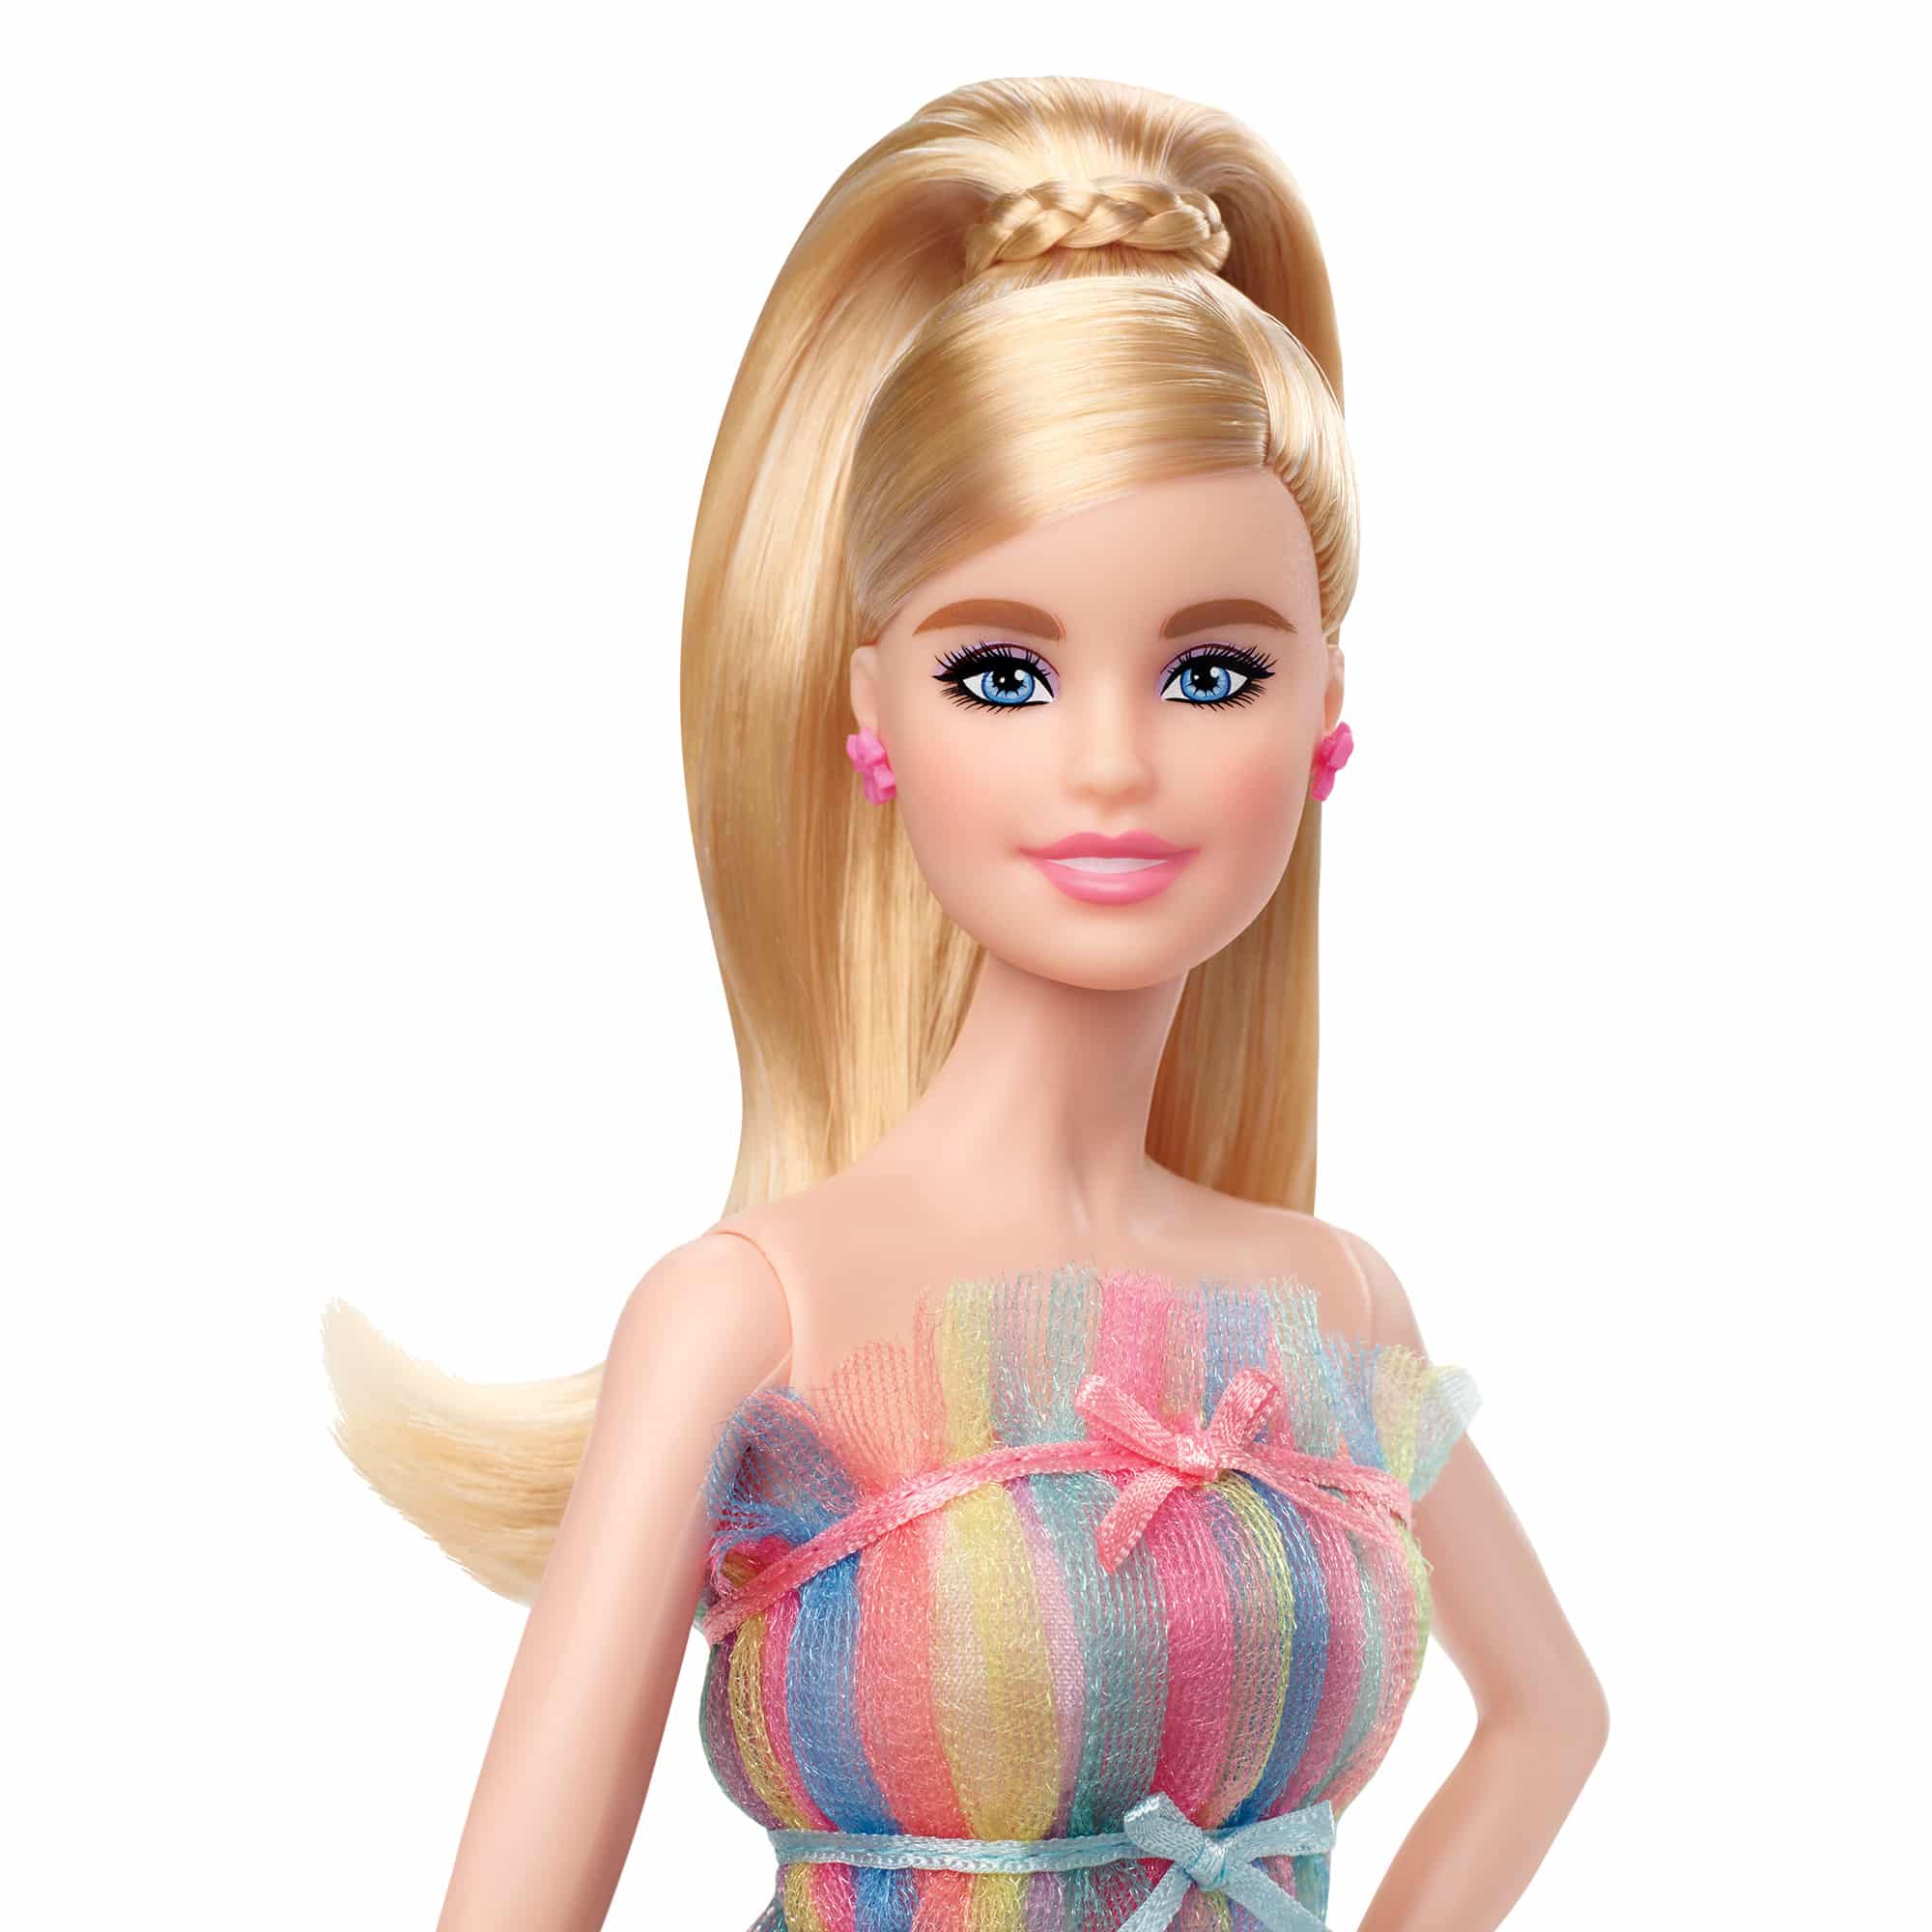 Barbie Signature Collection - Birthday Wishes Doll